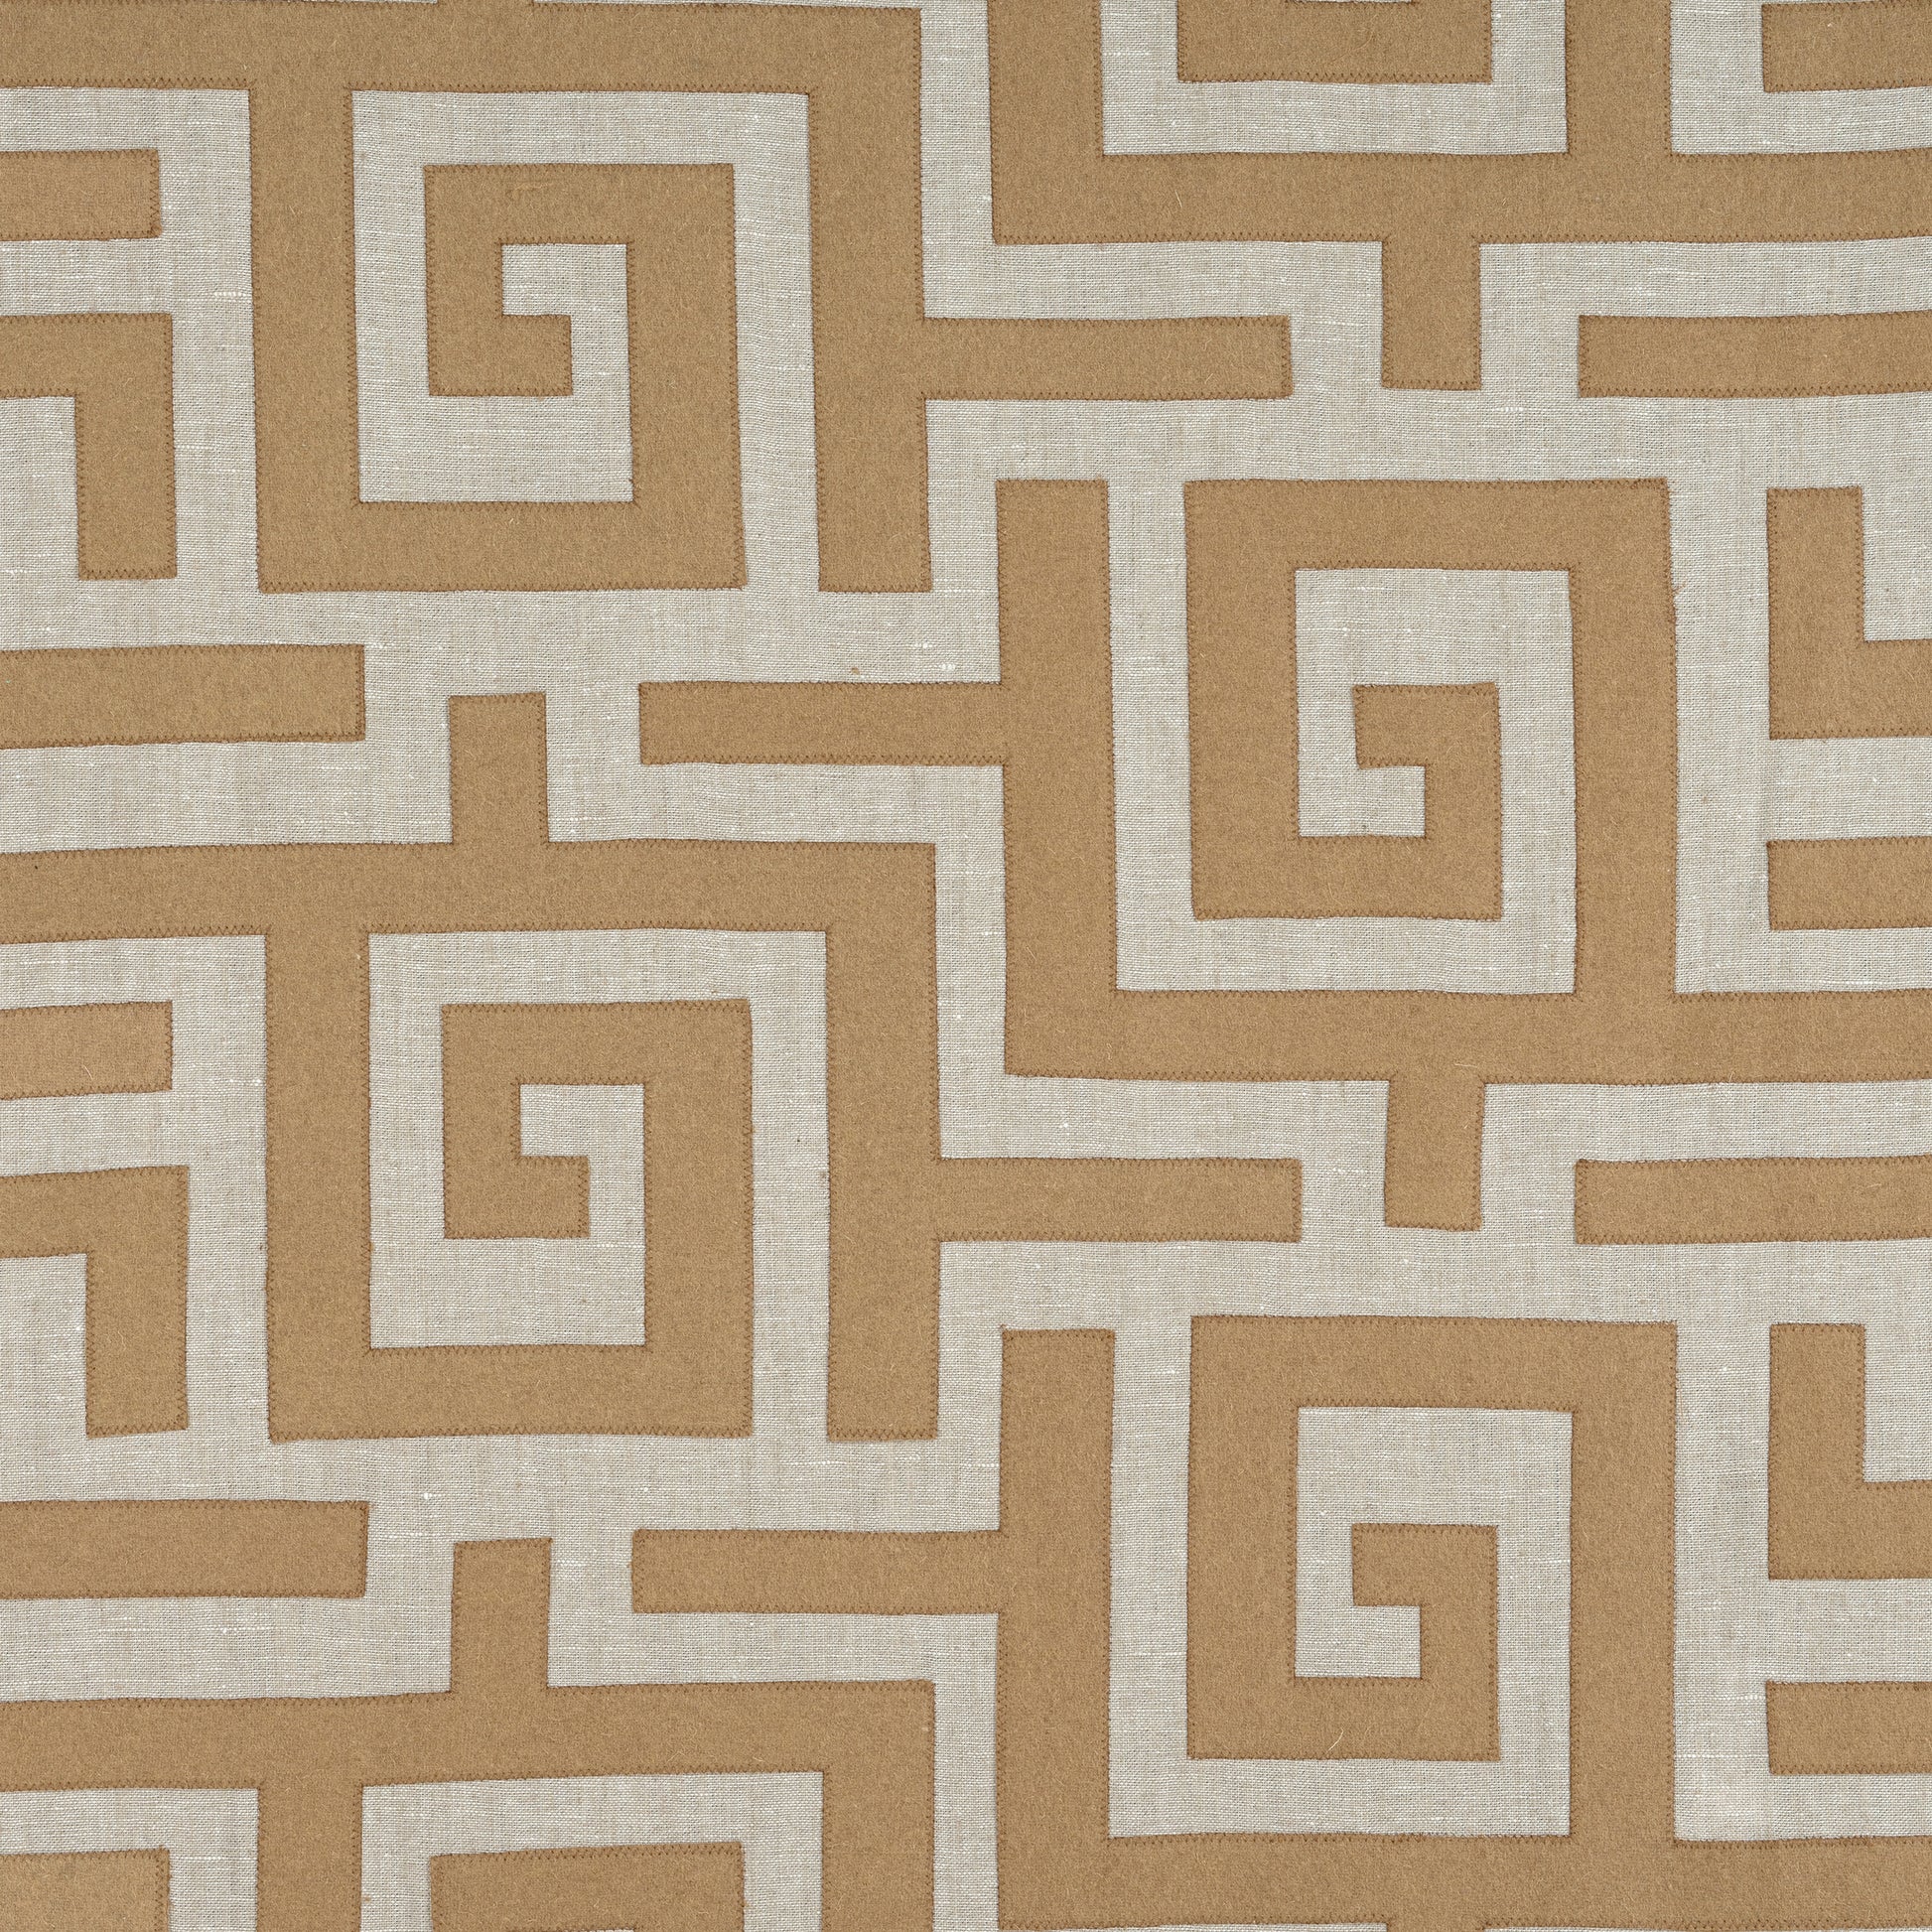 Purchase Thibaut Fabric Product W713224 pattern name Tulum Applique color Wheat on Natural